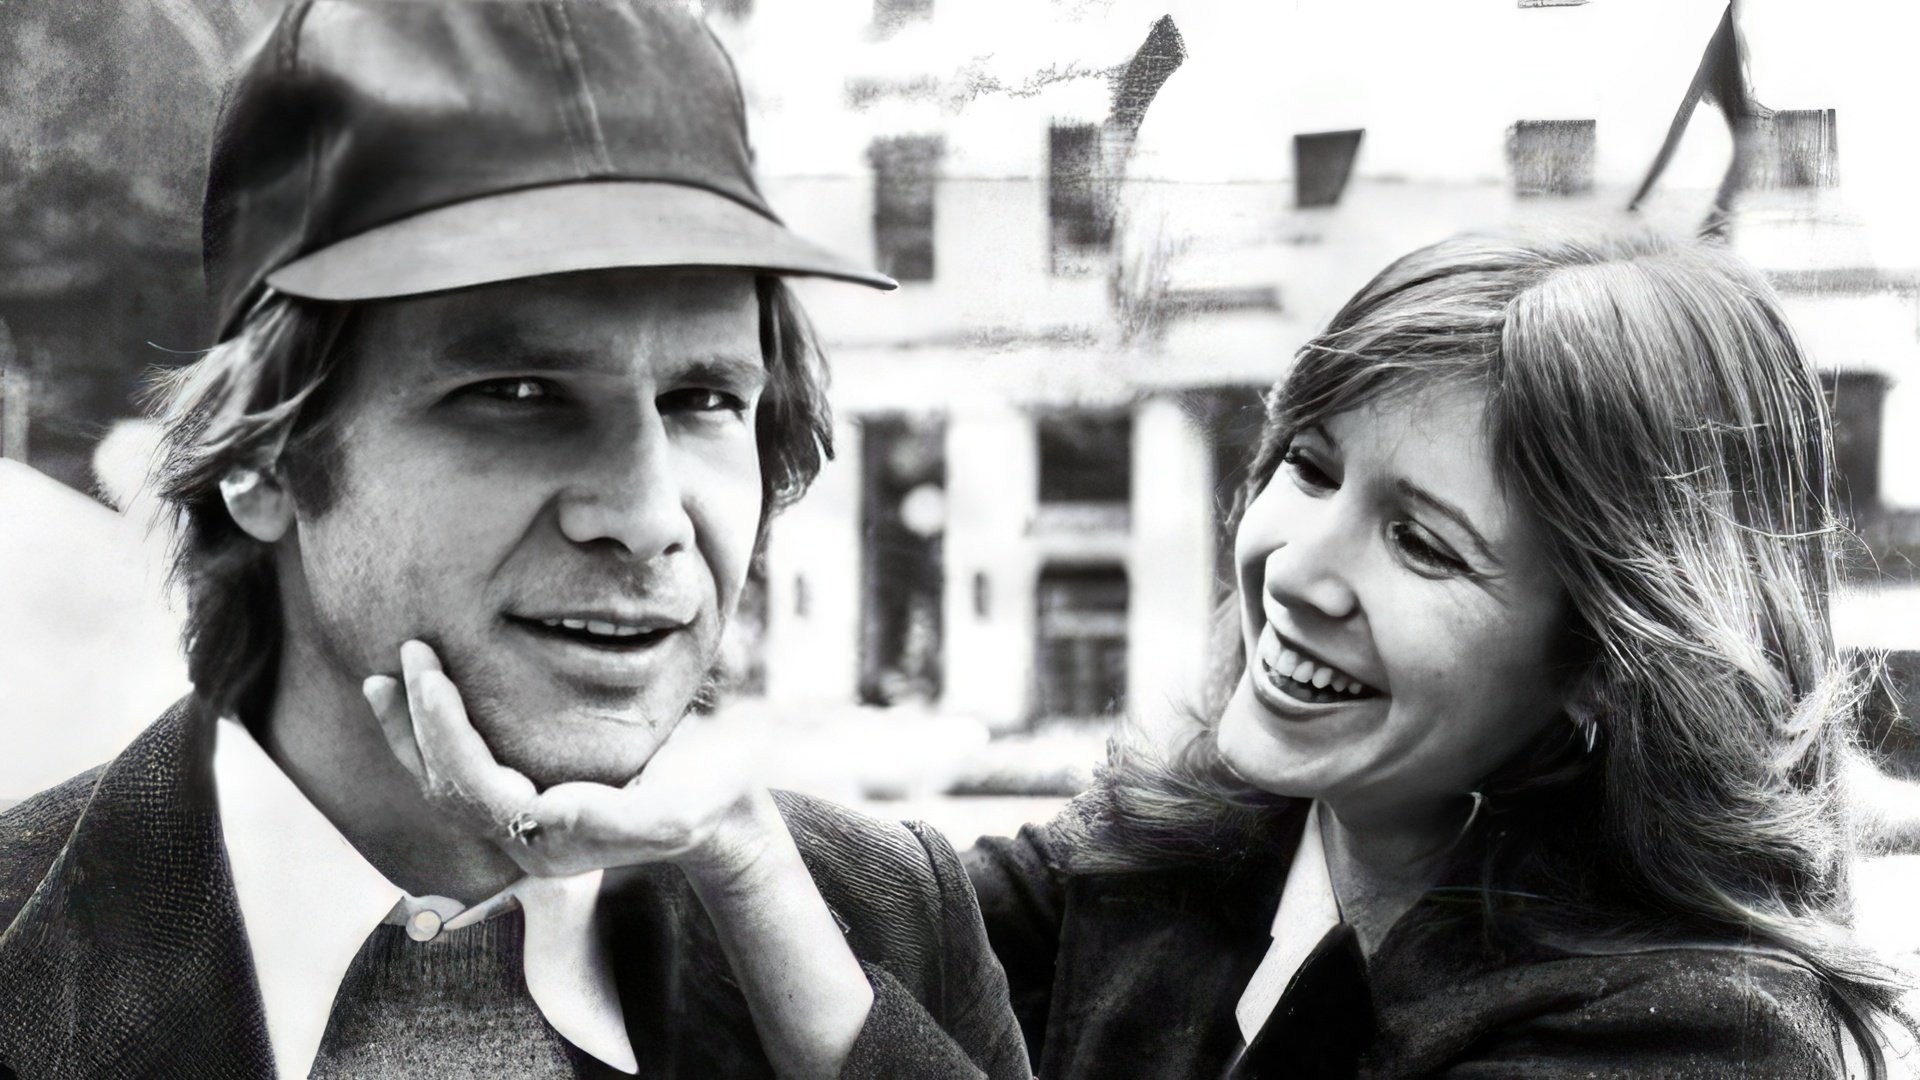 Harrison Ford was still married when dating Carrie Fisher